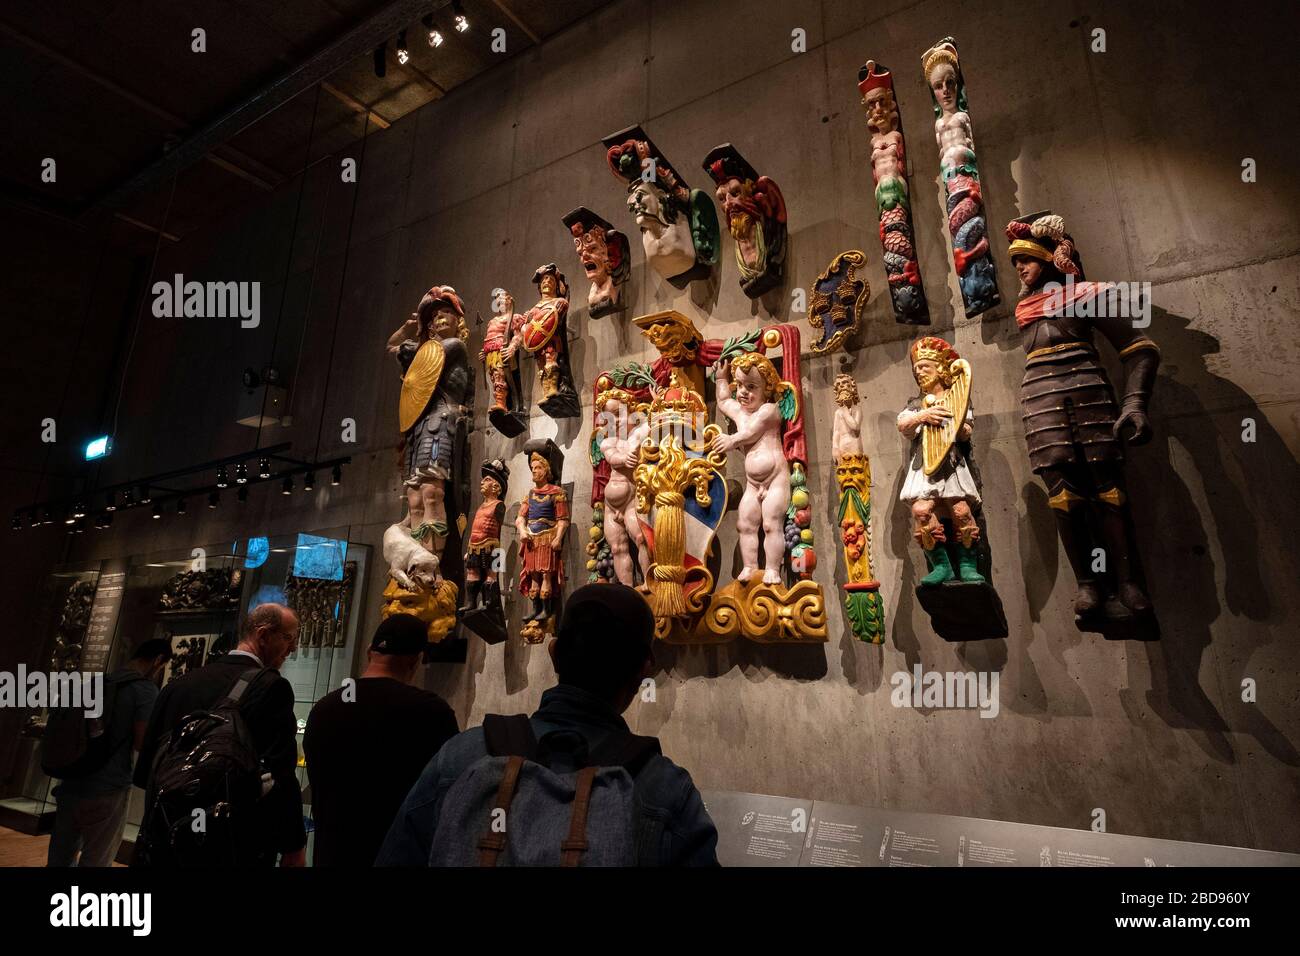 Tourists looking at colorful replicas of sculptures of the Vasa warship at the Vasa Museum in Stockholm, Sweden, Europe Stock Photo